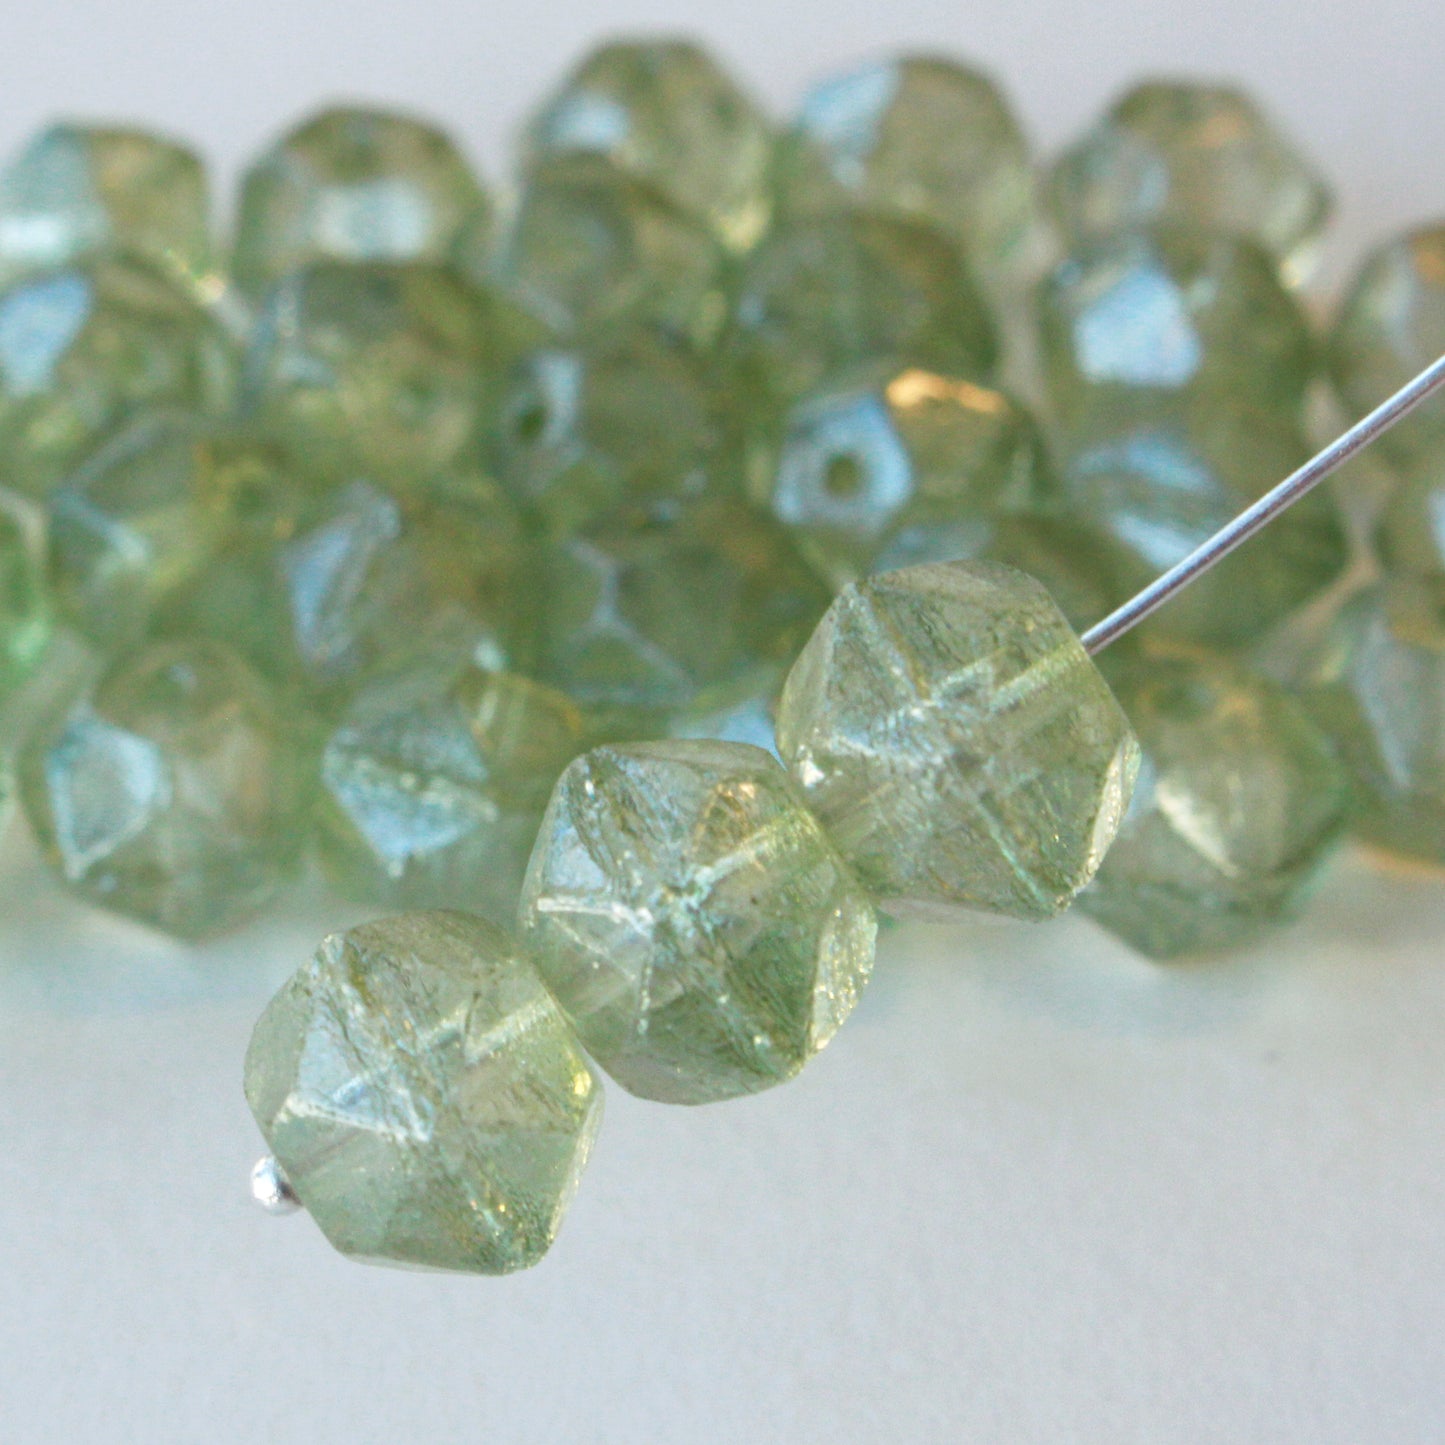 11mm English Cut Beads - Celadon Green with Silver Luster - 10